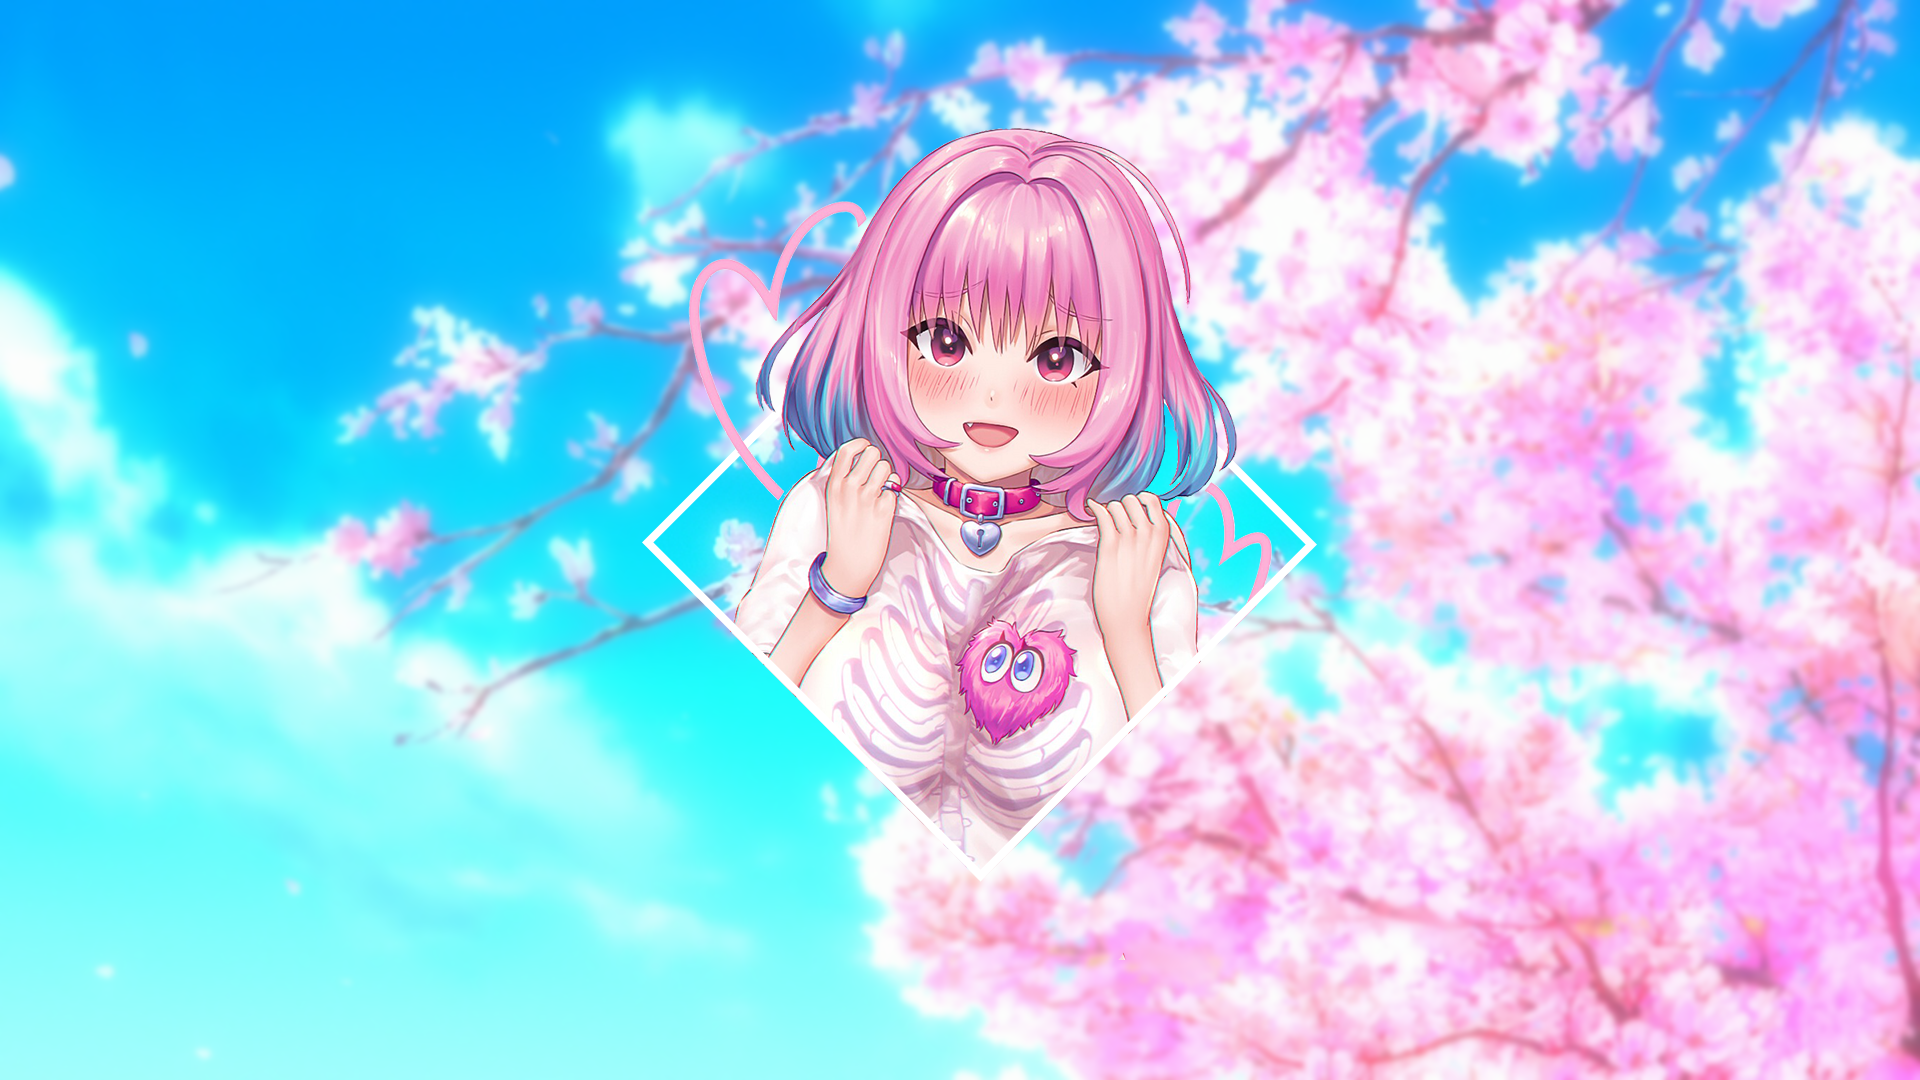 Anime 1920x1080 anime anime girls cherry blossom necklace pink hair picture-in-picture Riamu Yumemi THE iDOLM@STER: Cinderella Girls cyan pink